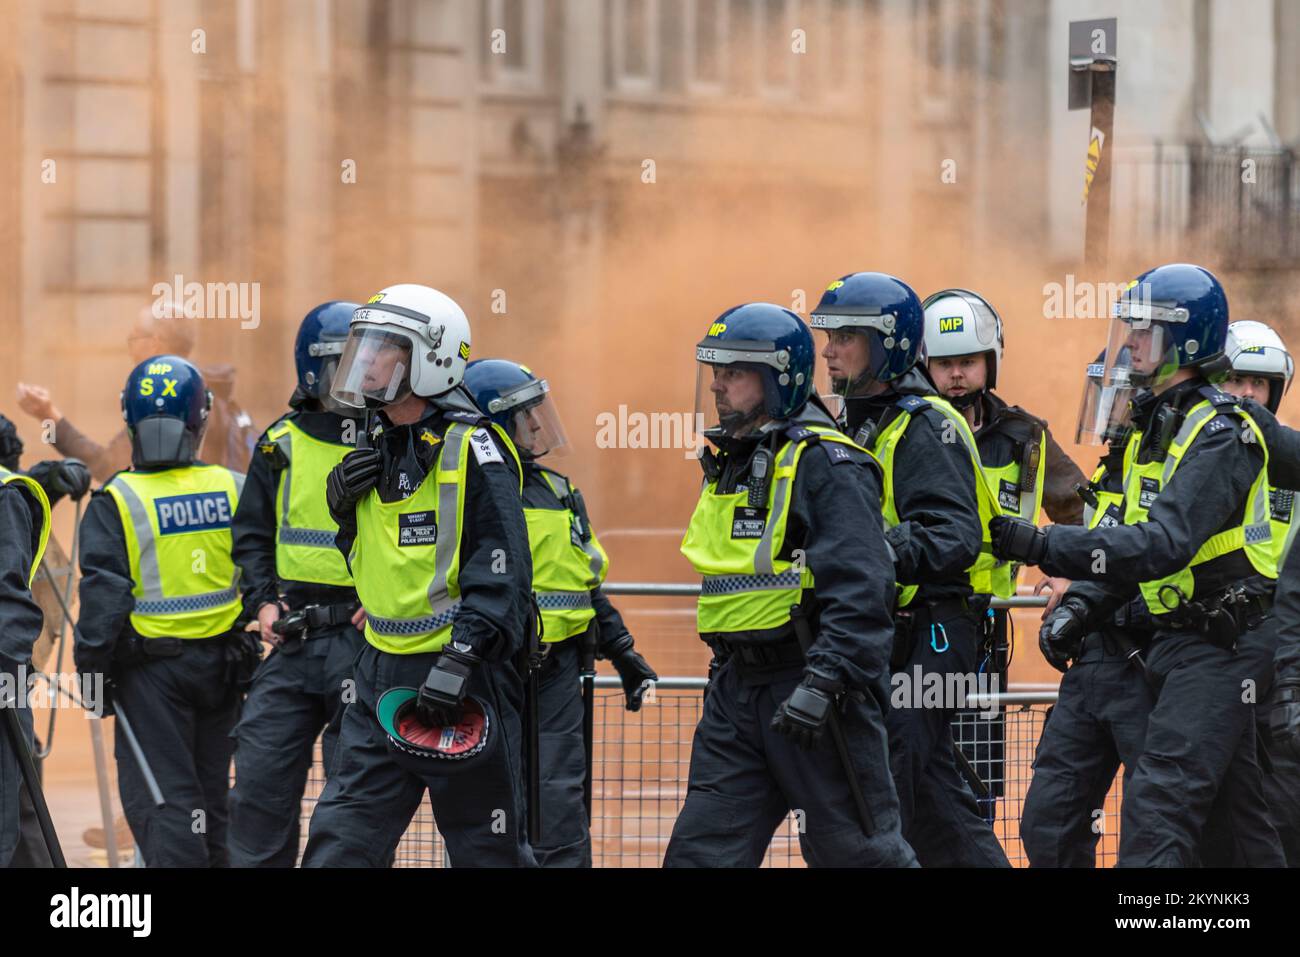 Supporters of Tommy Robinson, such as the EDL, protested in London demonstrating for his release after arrest. Riot police arriving, with smoke flares Stock Photo